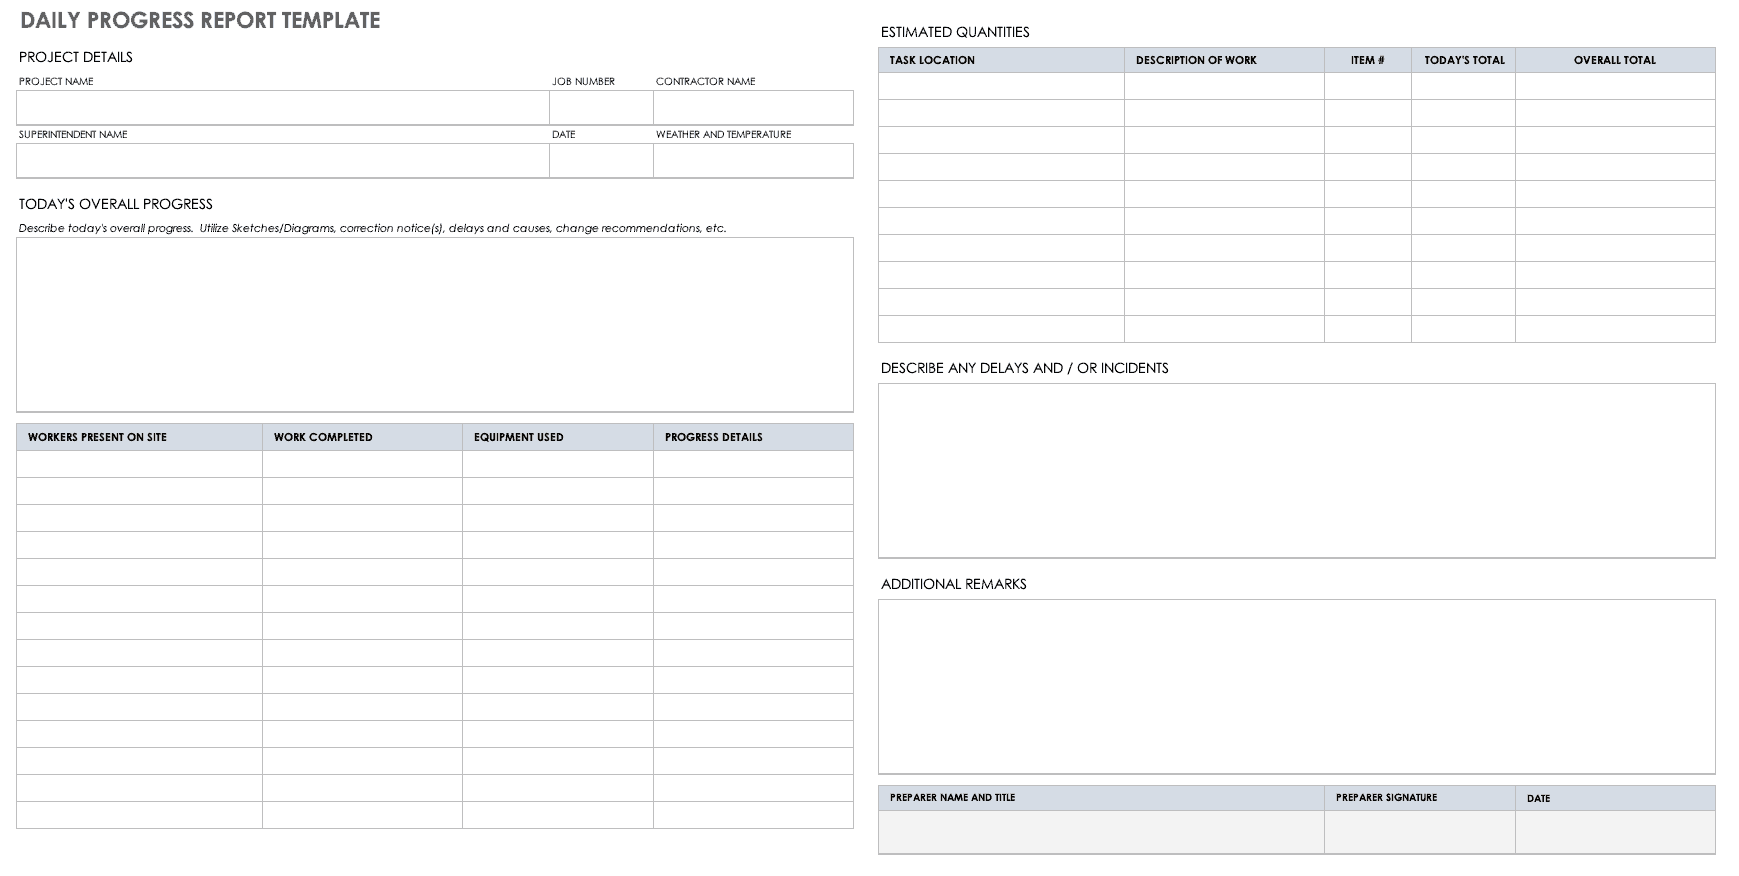 Daily Project Progress Report Template